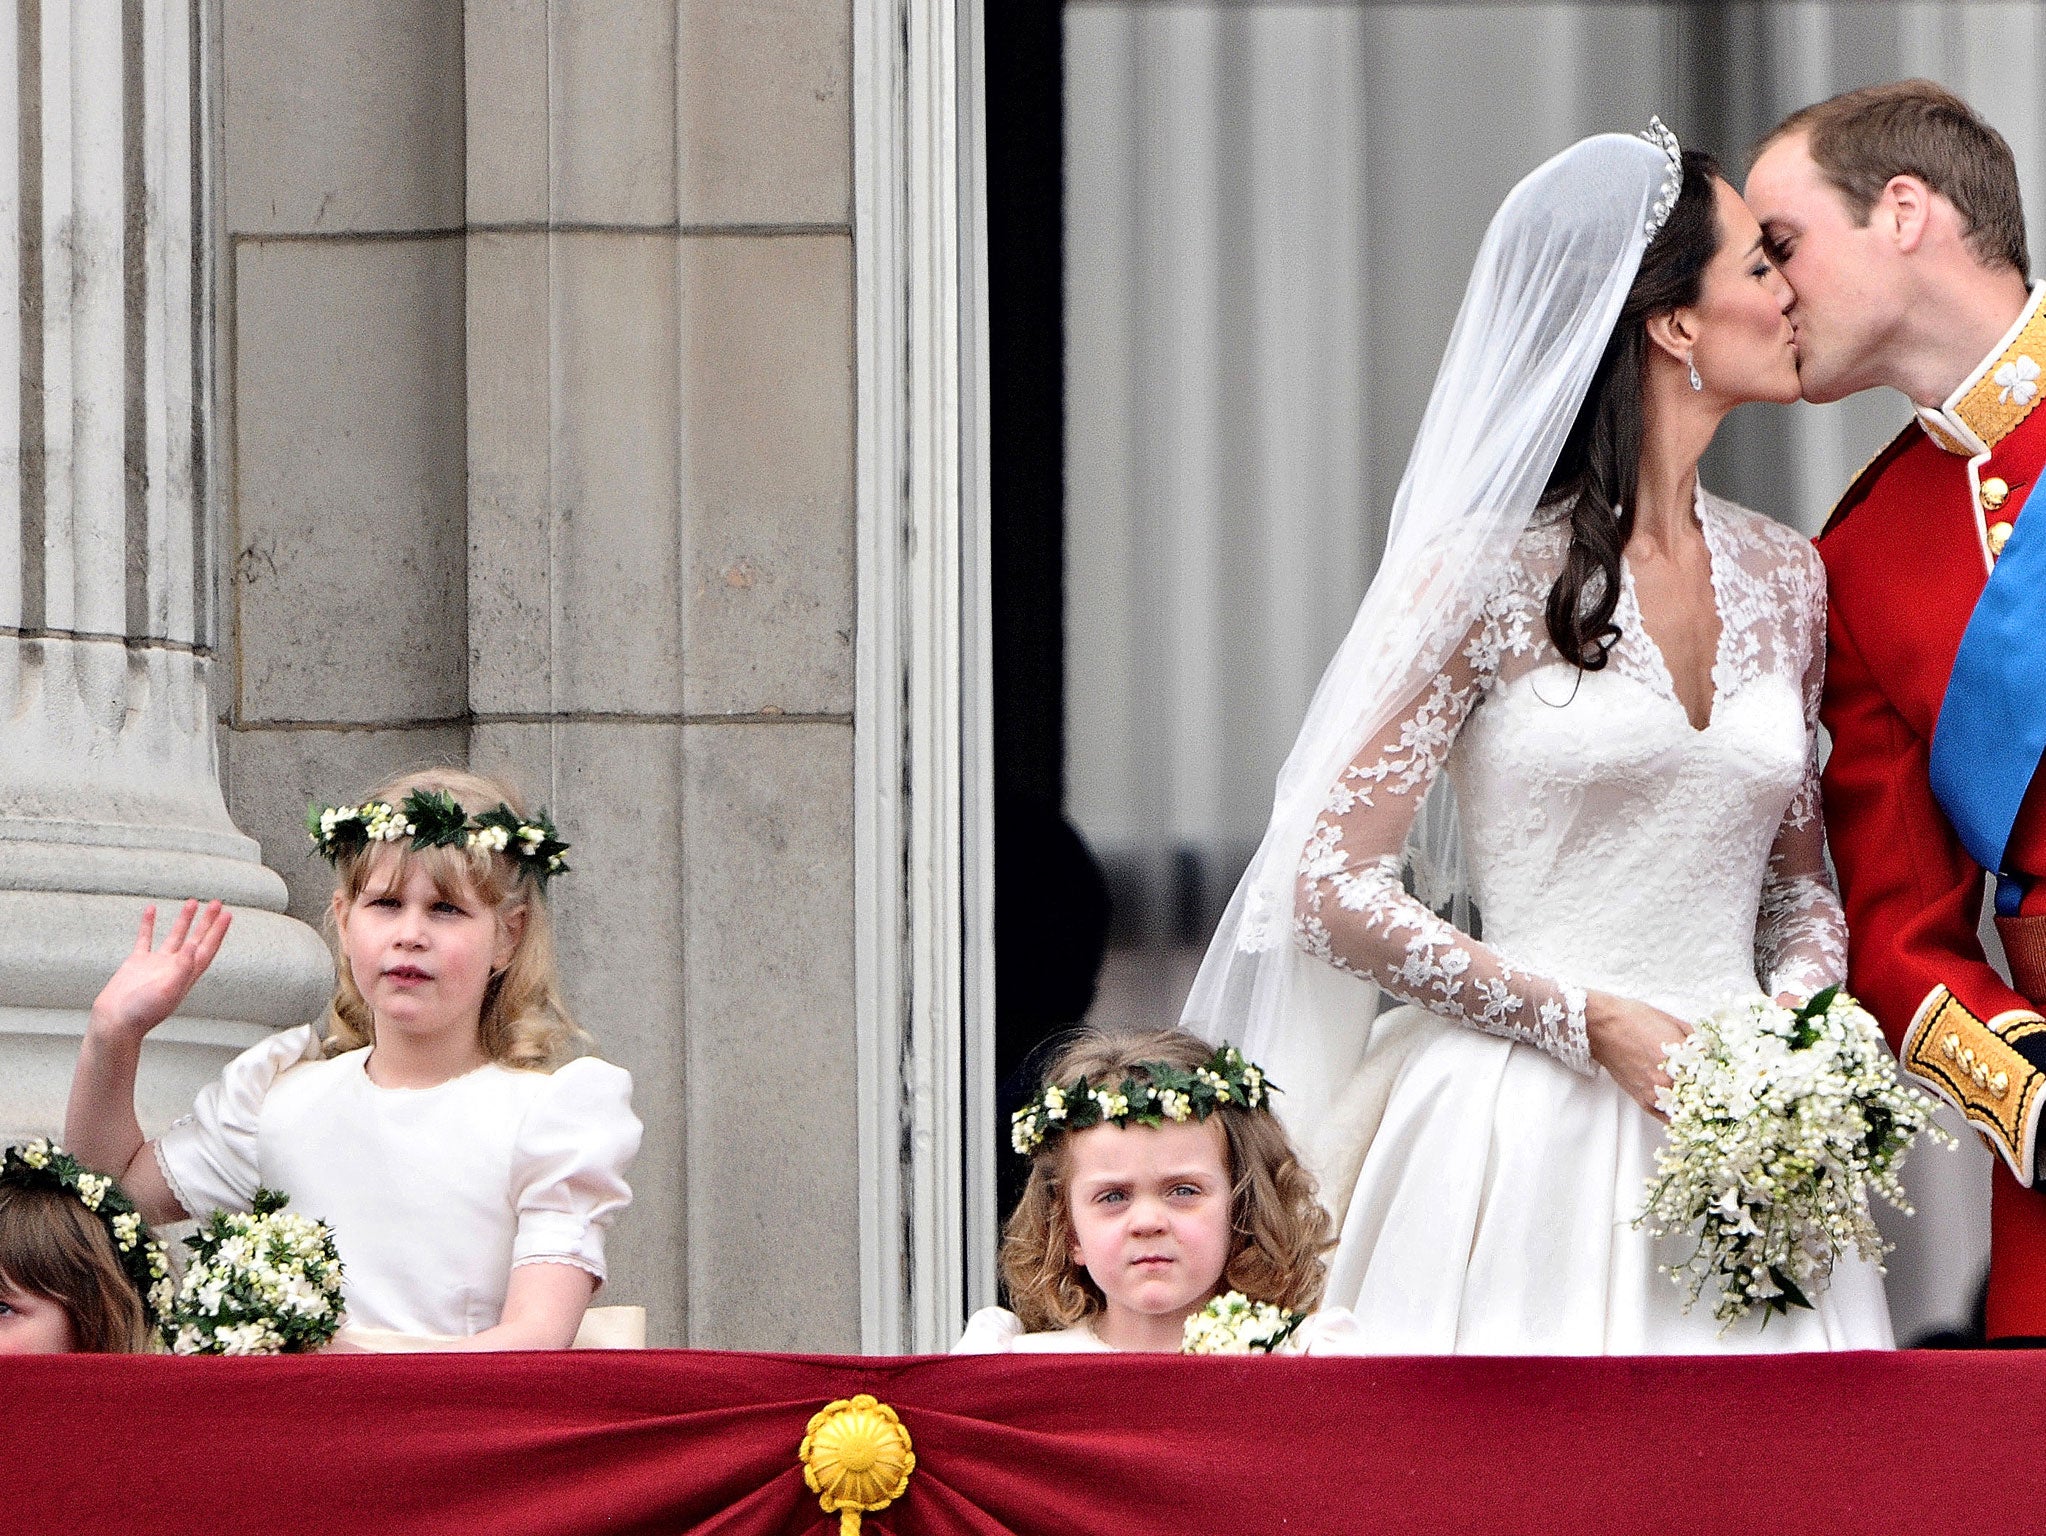 Britain's Prince William kisses his wife Kate, Duchess of Cambridge, on the balcony of Buckingham Palace, after the wedding service, on April 29, 2011, in London.